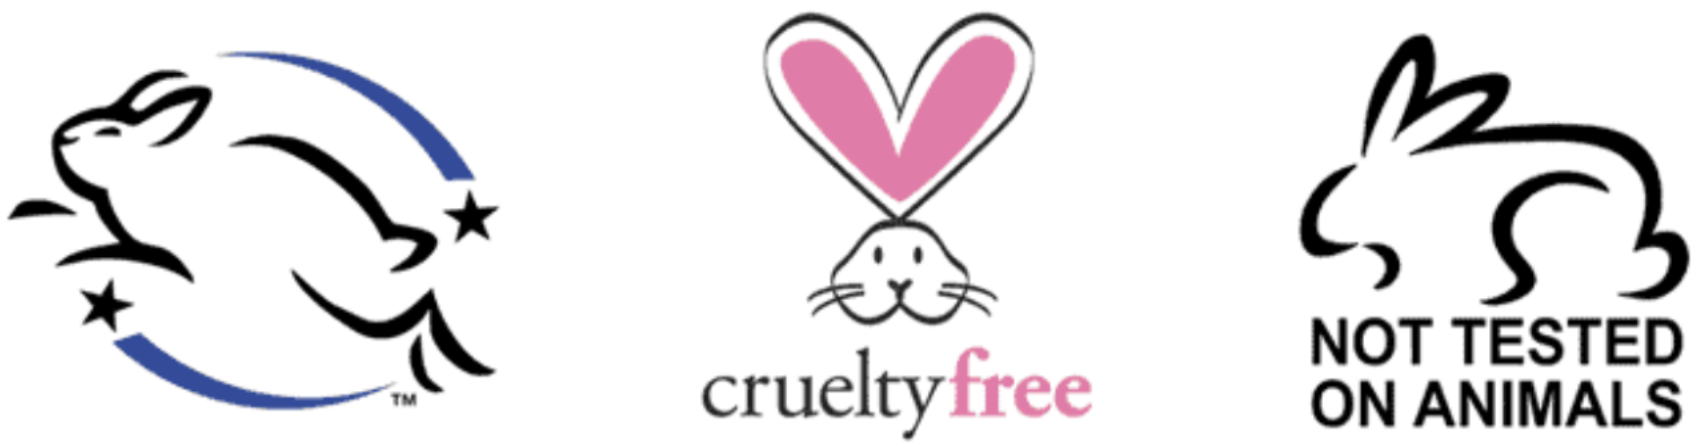 Crueltyfree and Leaping Bunny certificates guarantee that the cosmetics have not been tested on animals